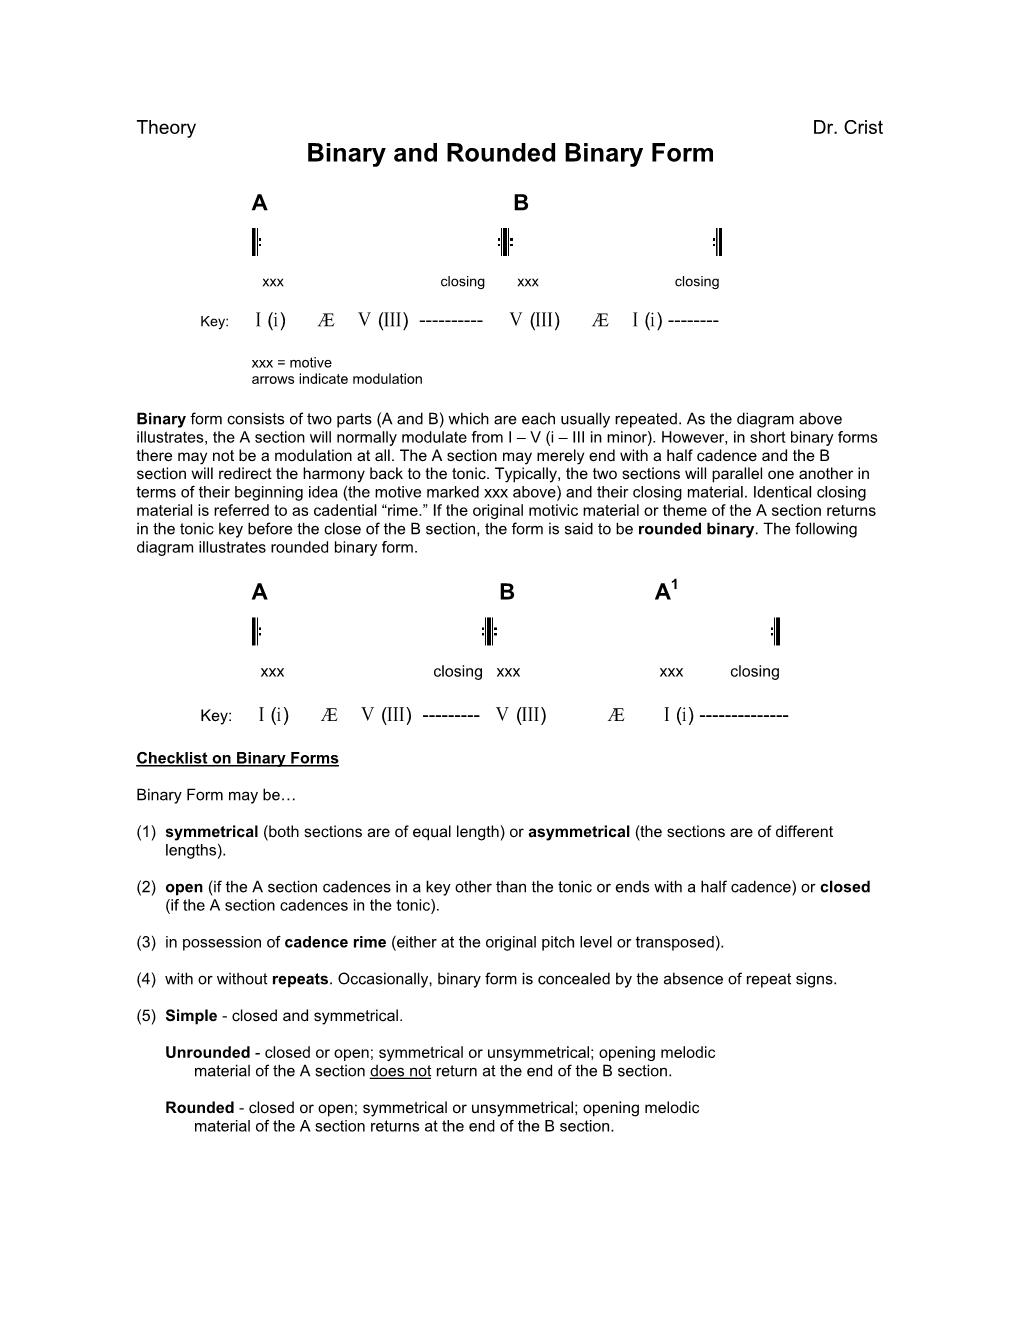 Binary and Rounded Binary Form